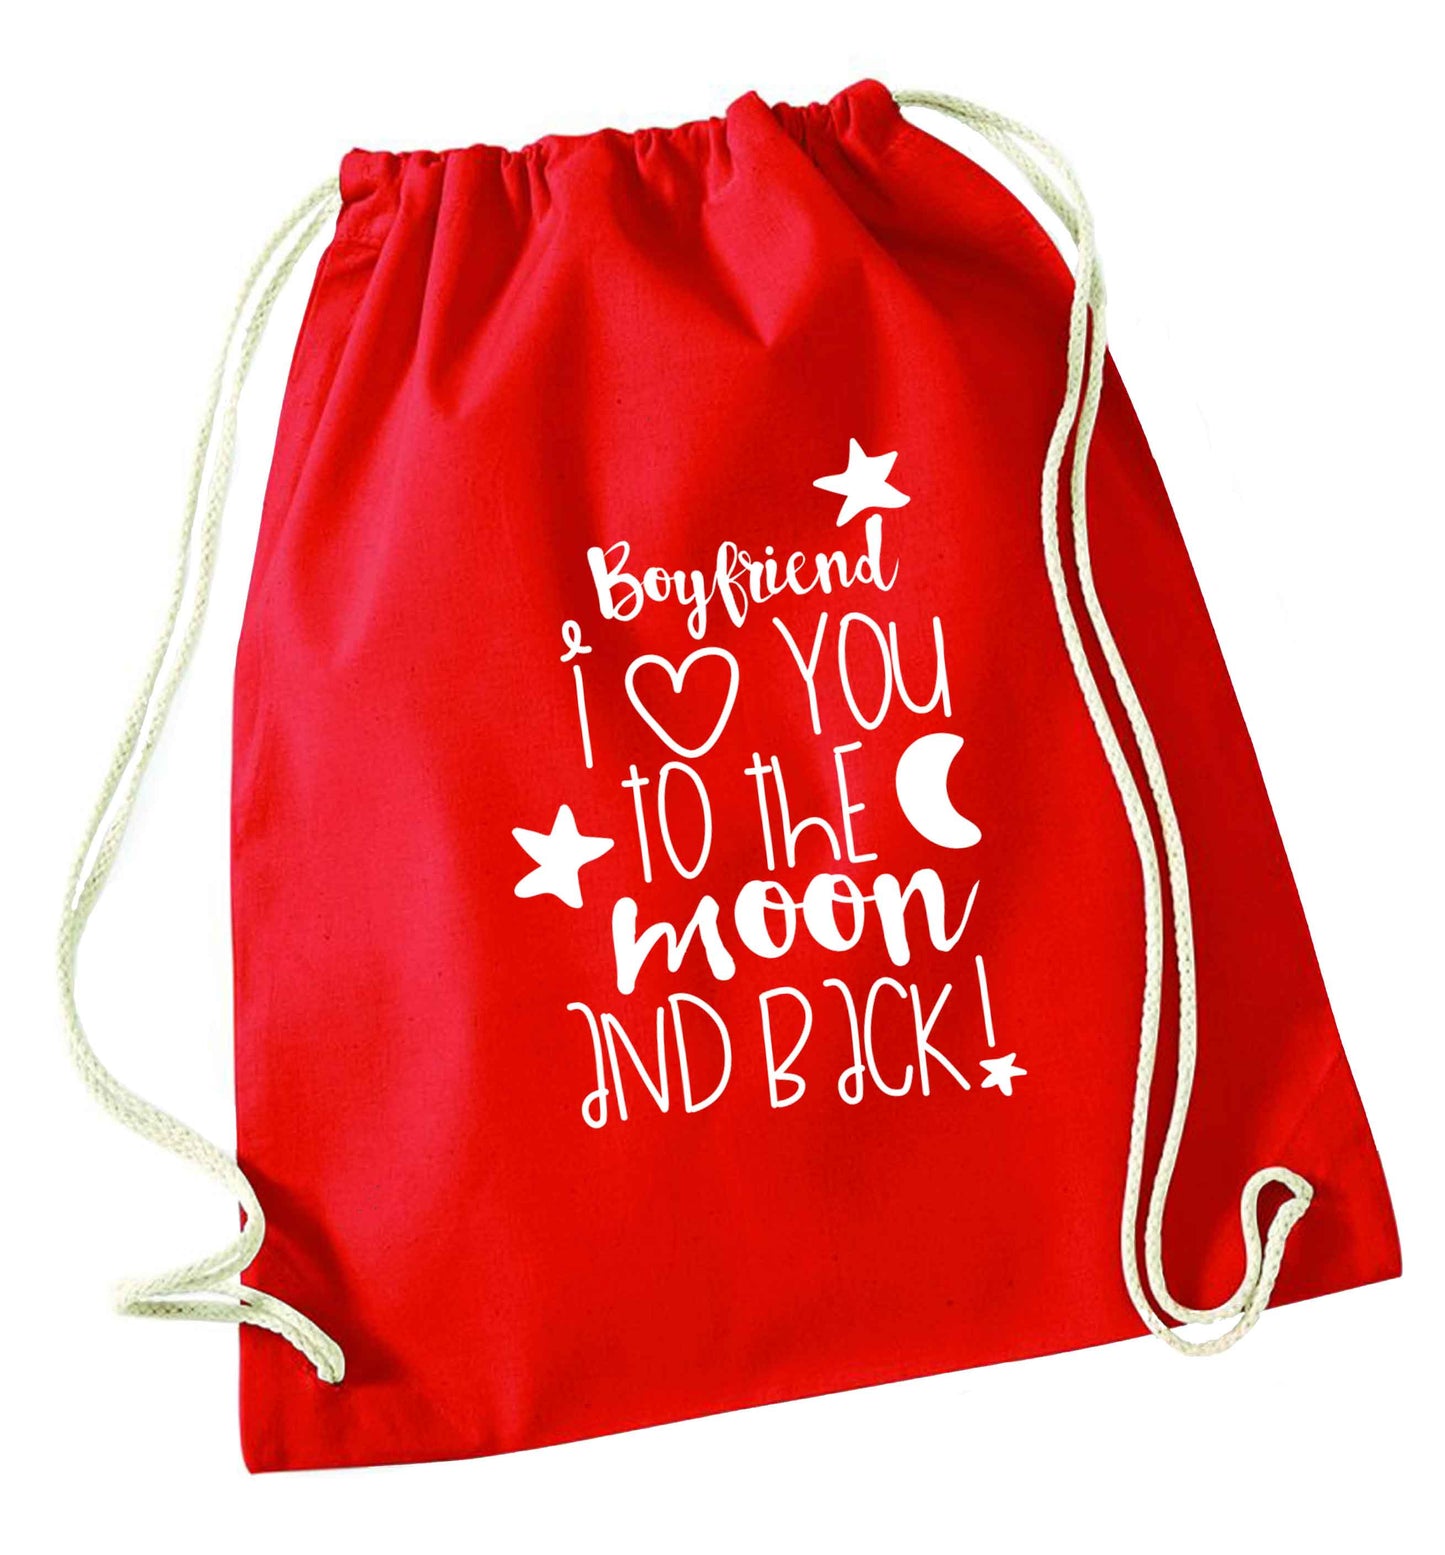 Boyfriend I love you to the moon and back red drawstring bag 